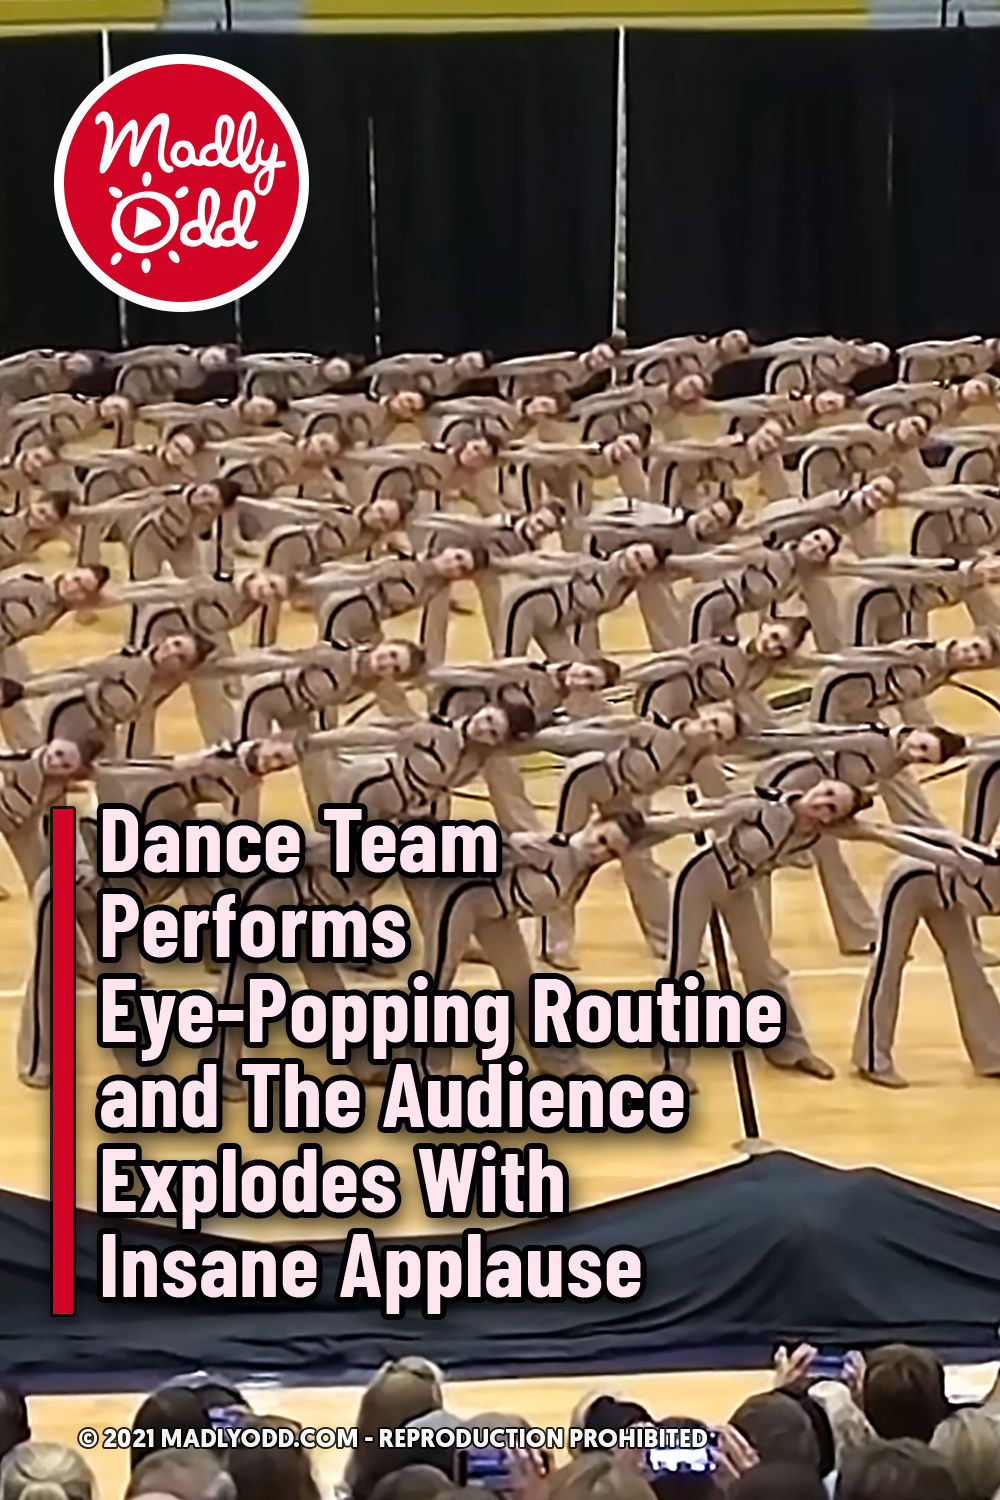 Dance Team Performs Eye-Popping Routine and The Audience Explodes With Insane Applause